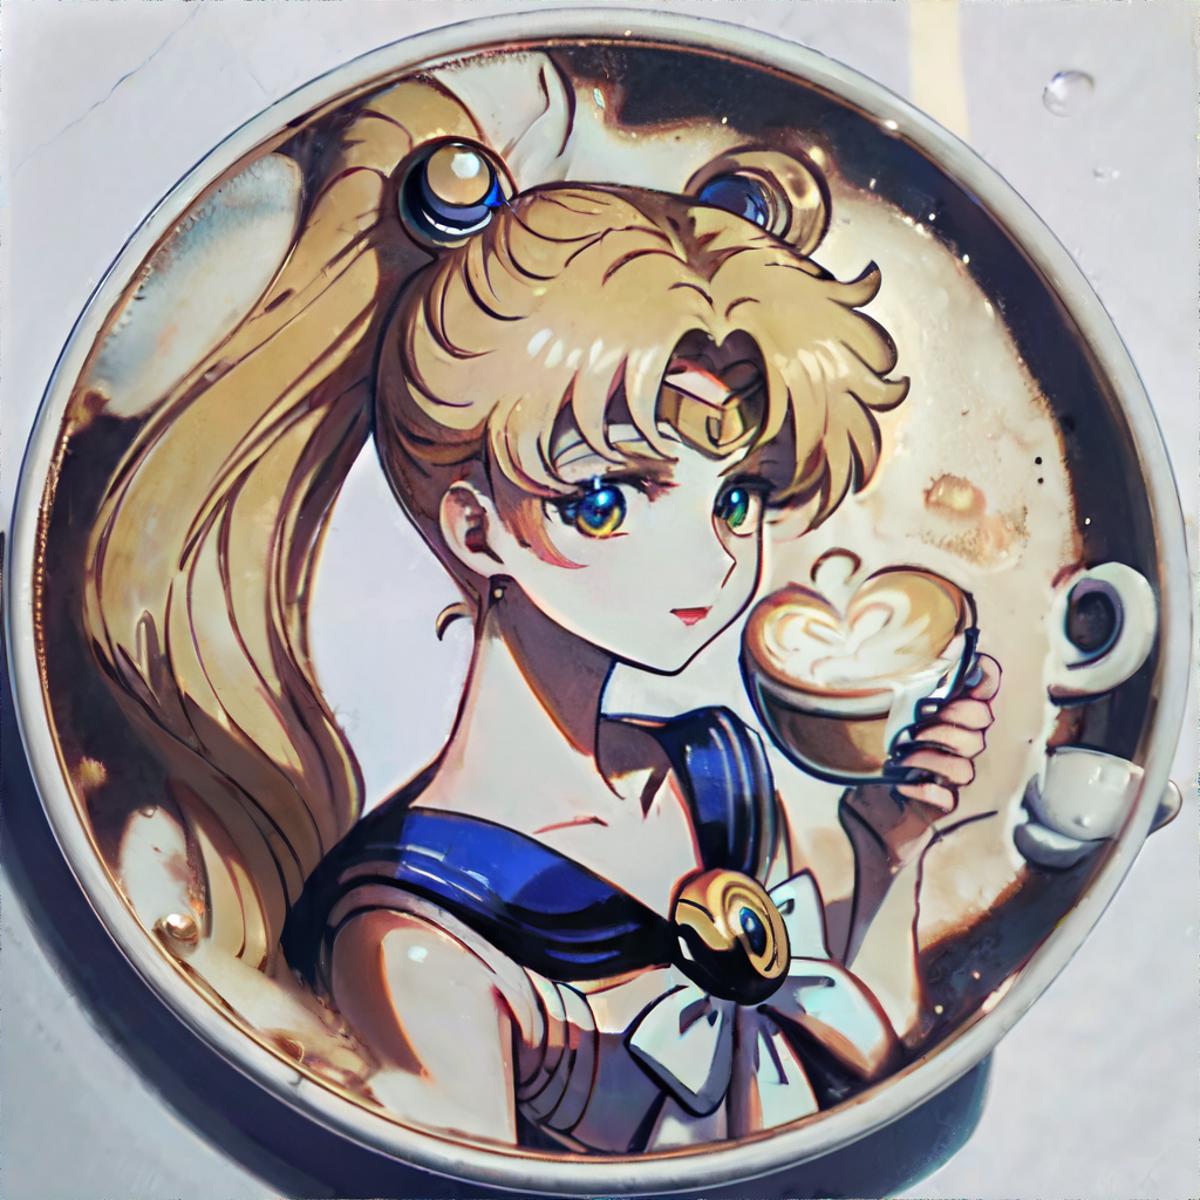 latte art(character) image by bzlibby